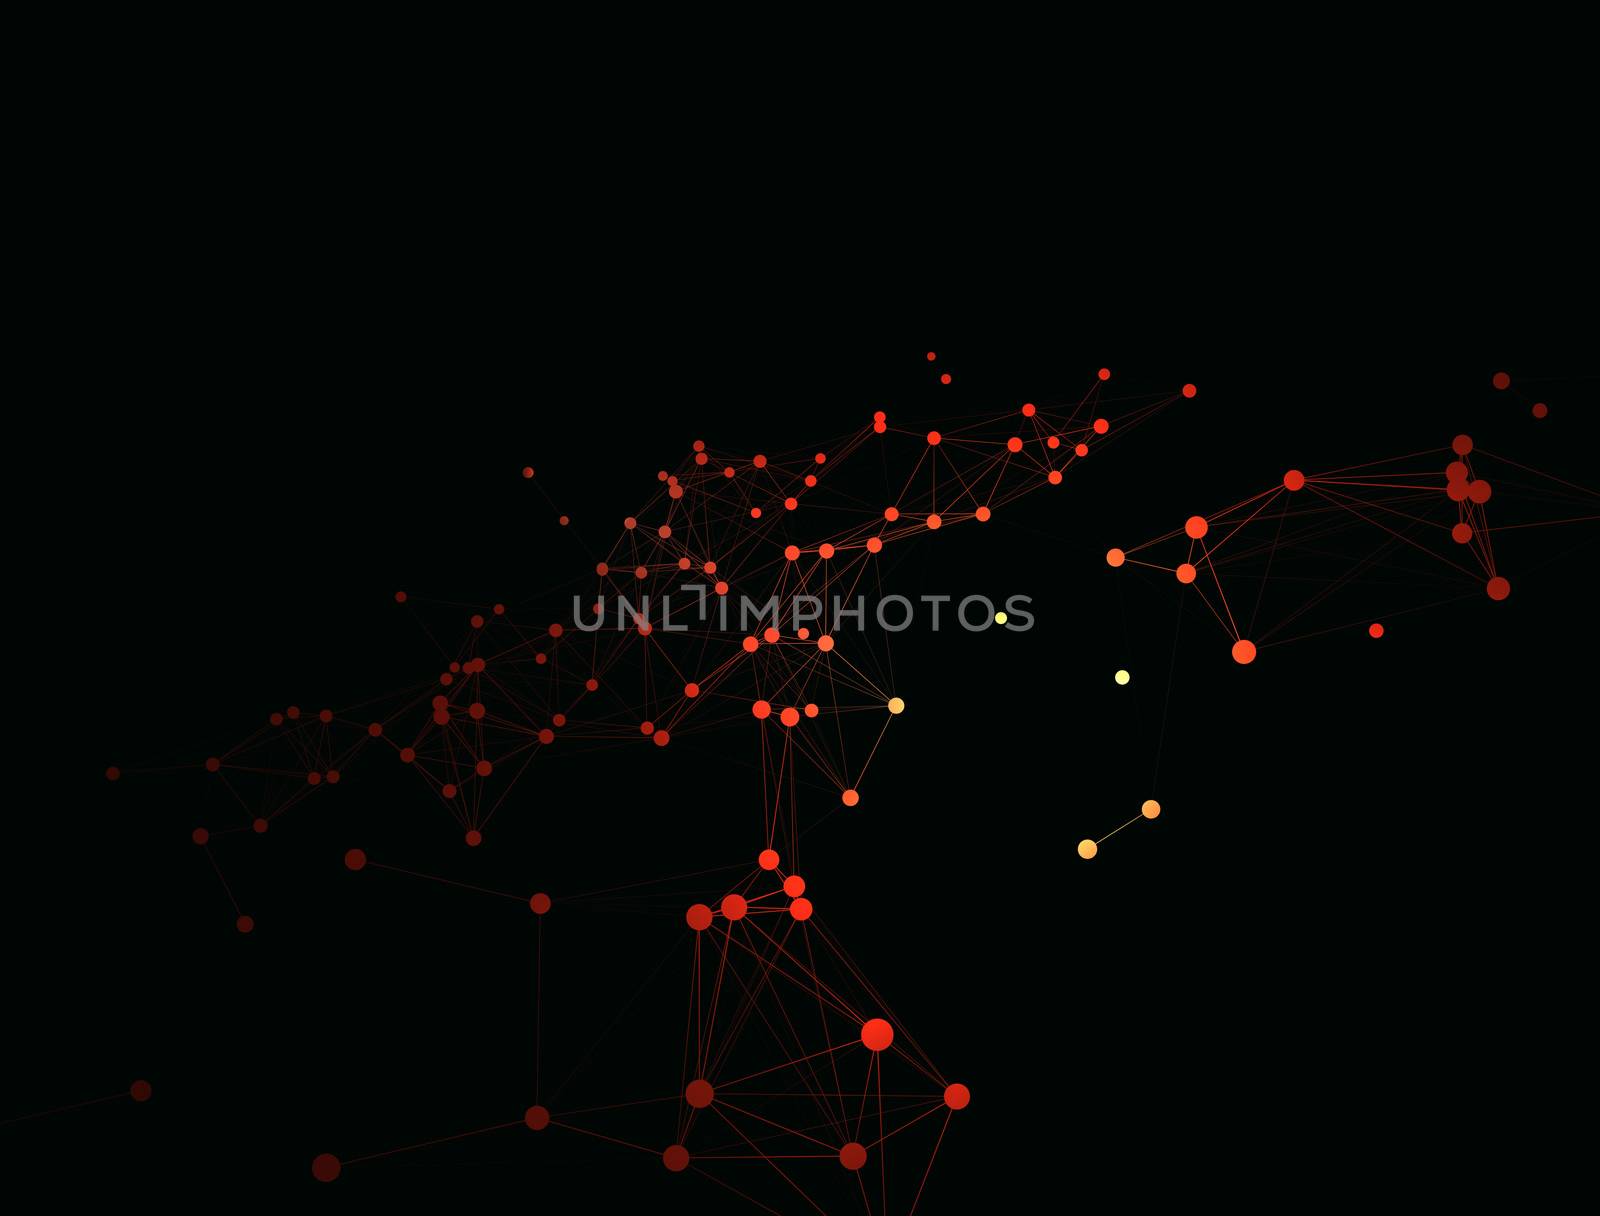 Trendy line art icon with red and yellow dots and line dots on dark background. Decorative backdrop. Business concept. Abstract geometric pattern. Black design element. Trendy decor.